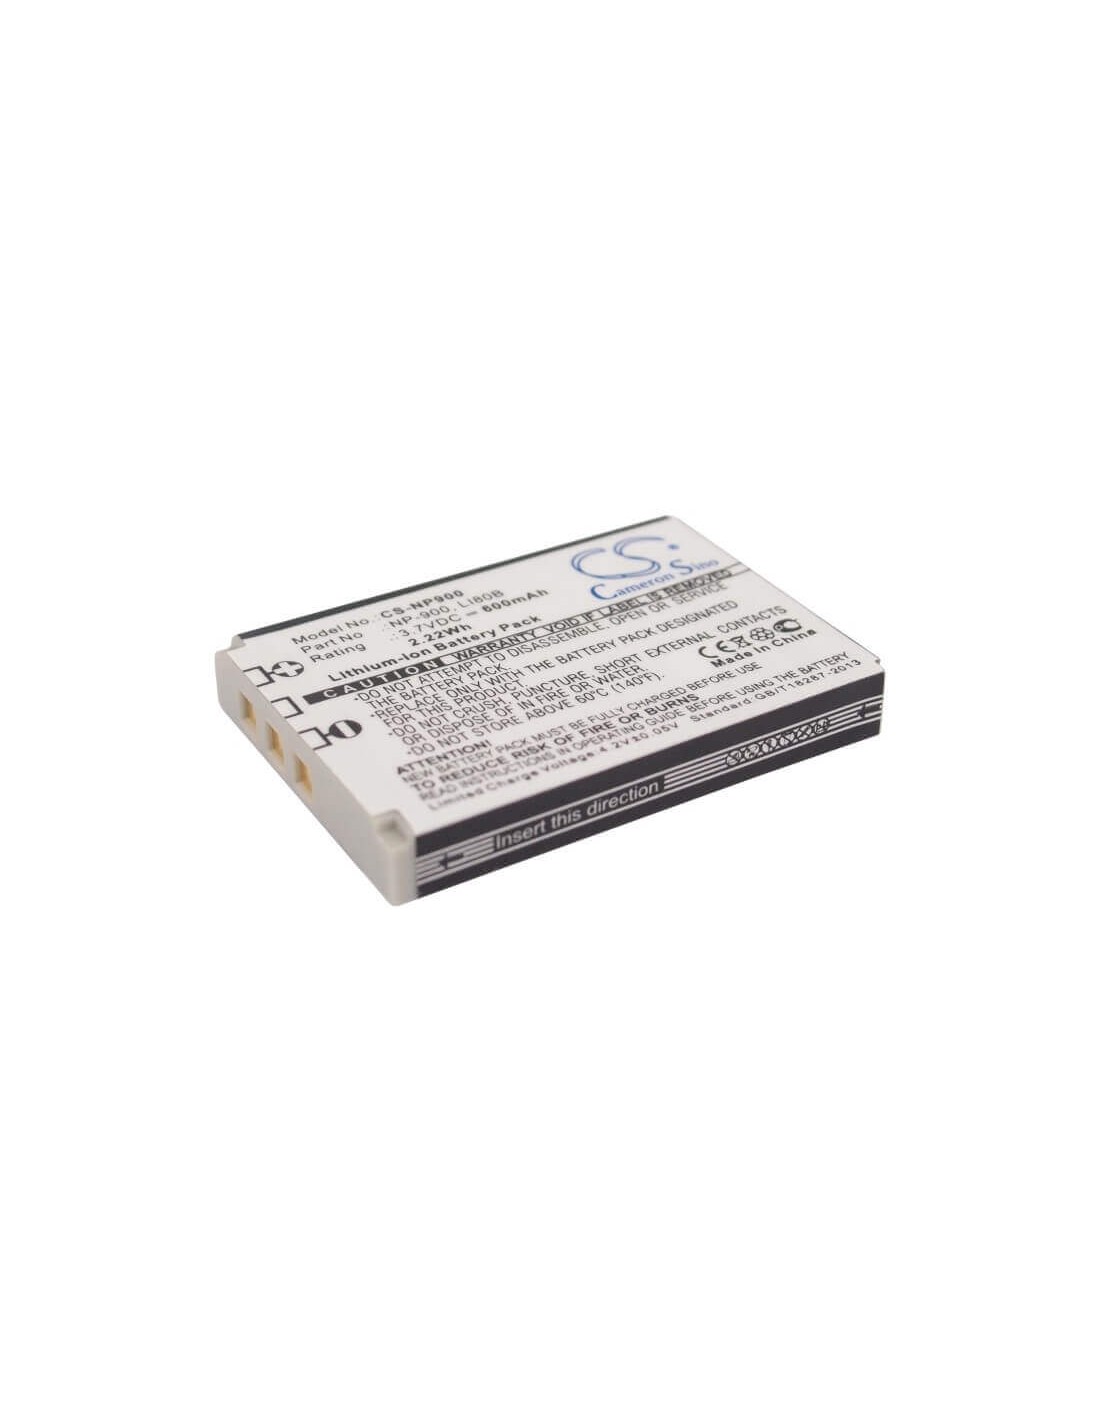 Battery for Maginon Dc-6600, Dc-6800, Performic S5, 3.7V, 600mAh - 2.22Wh